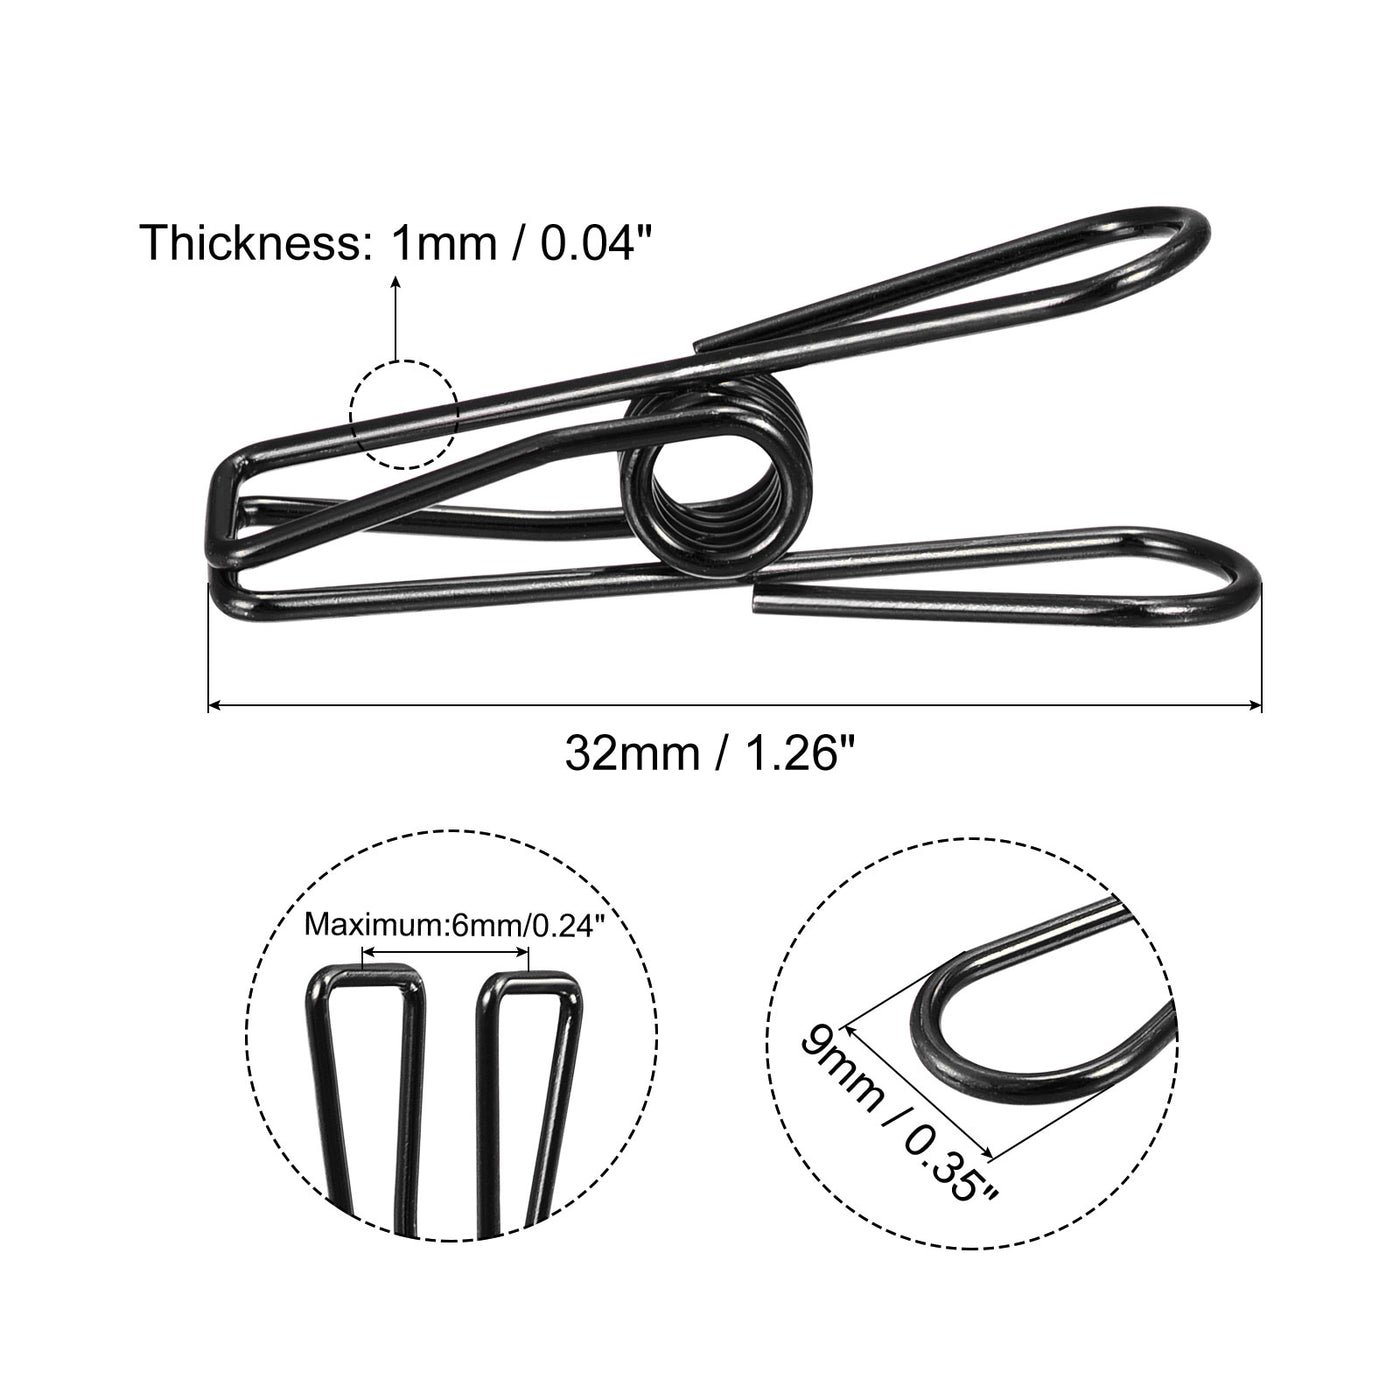 uxcell Uxcell Tablecloth Clips, 32mm Carbon Steel Clamps for Fixing Table Cloth, Black 25 Pcs